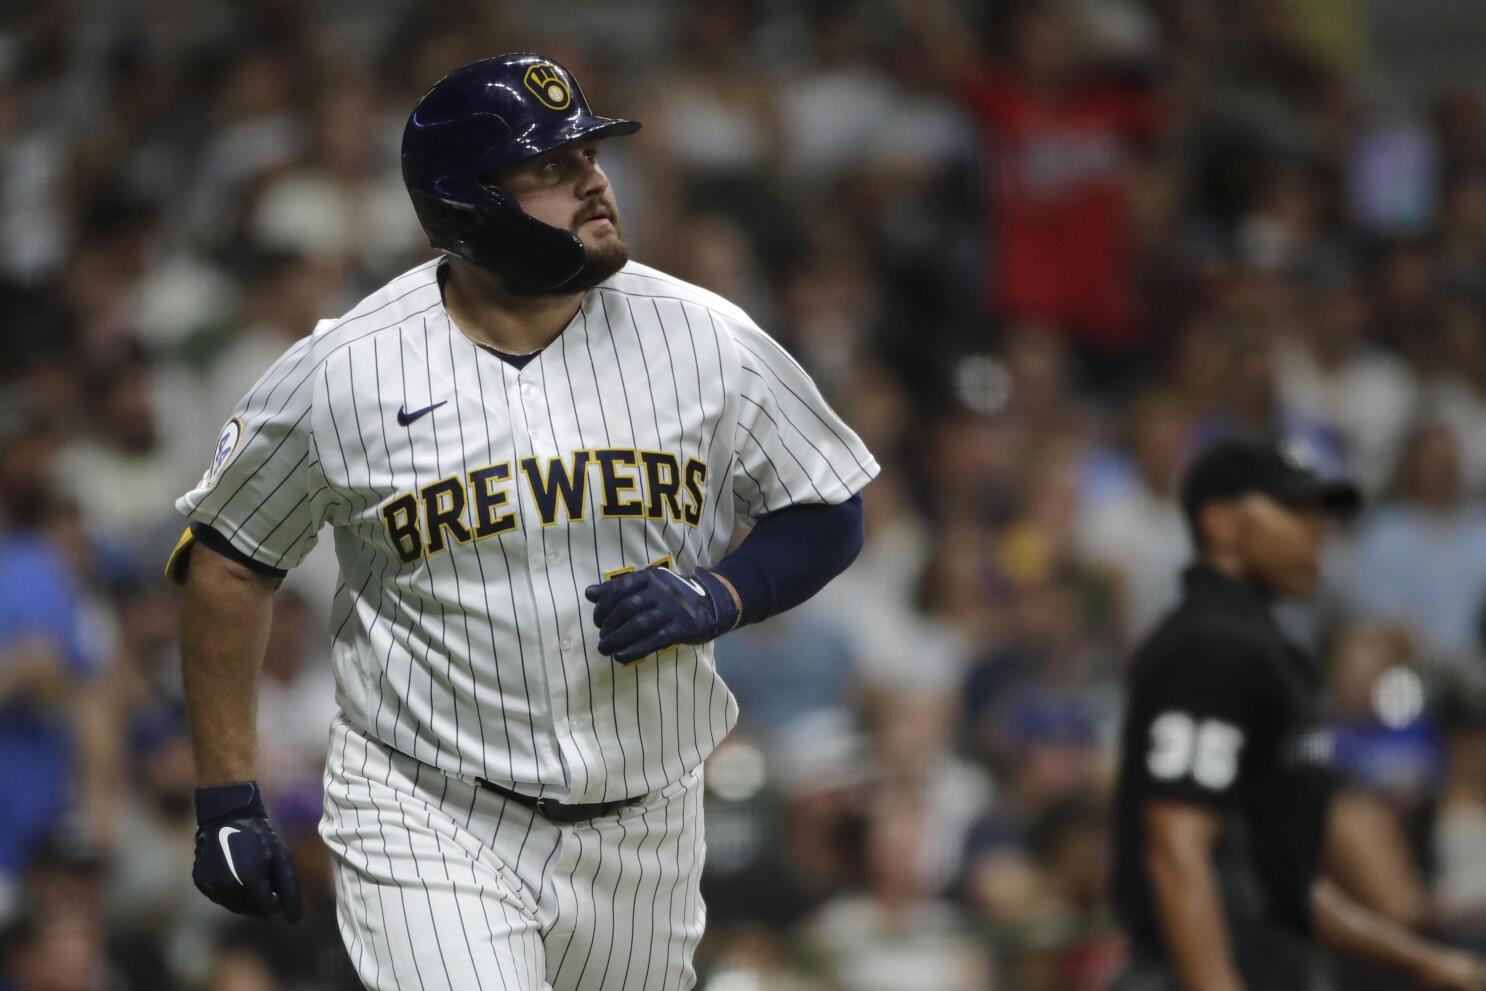 Tellez homers twice to help Brewers beat White Sox 6-1